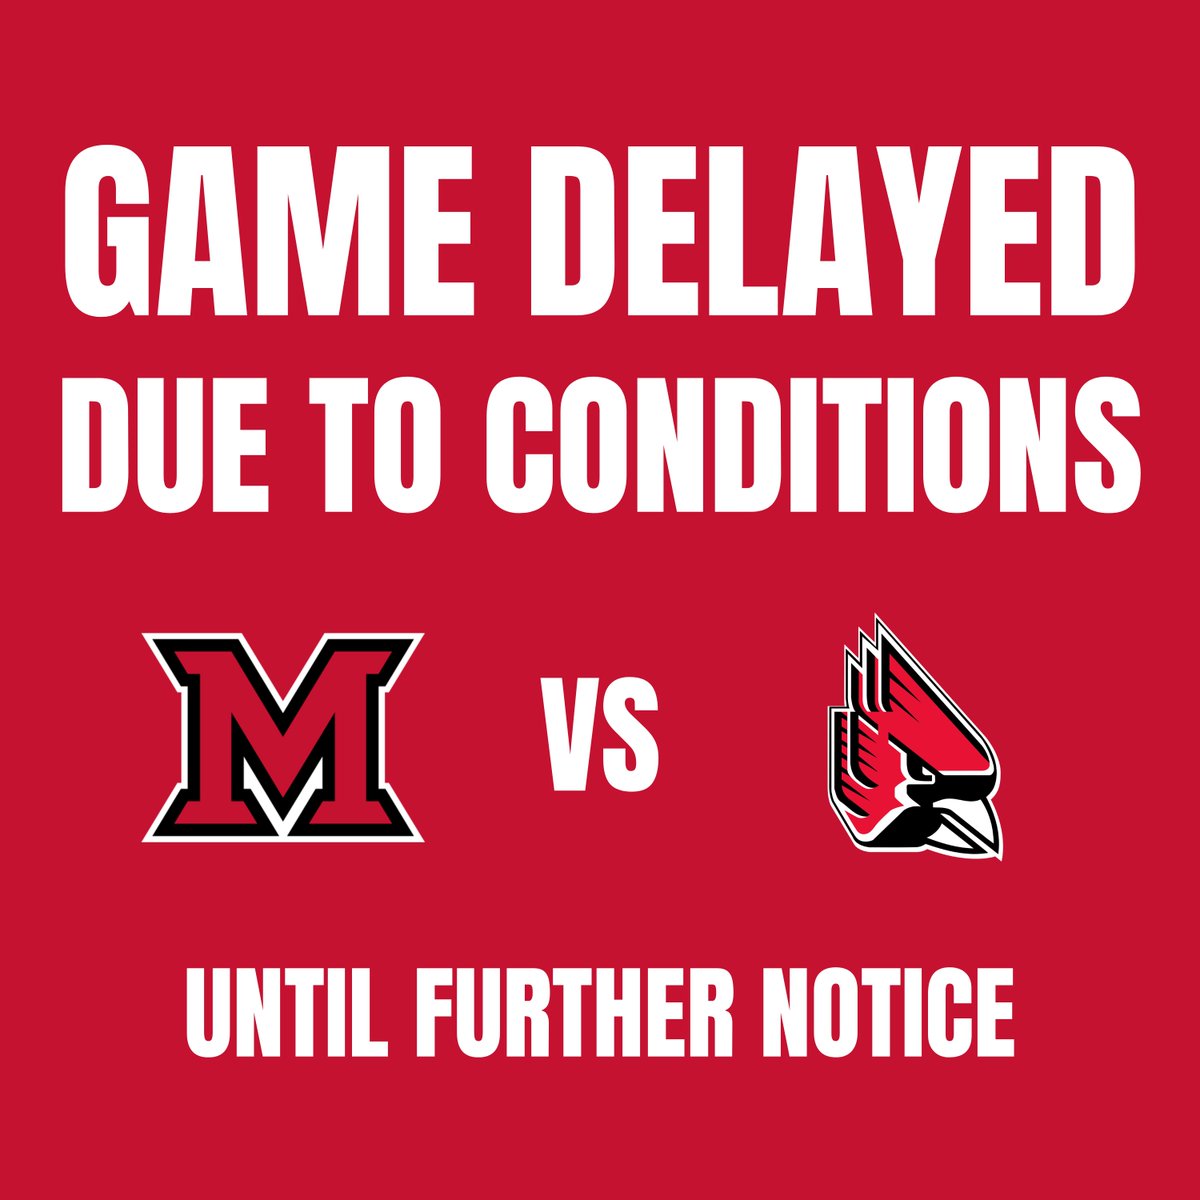 Hang in there folks, we are under a weather delay. #RiseUpRedHawks